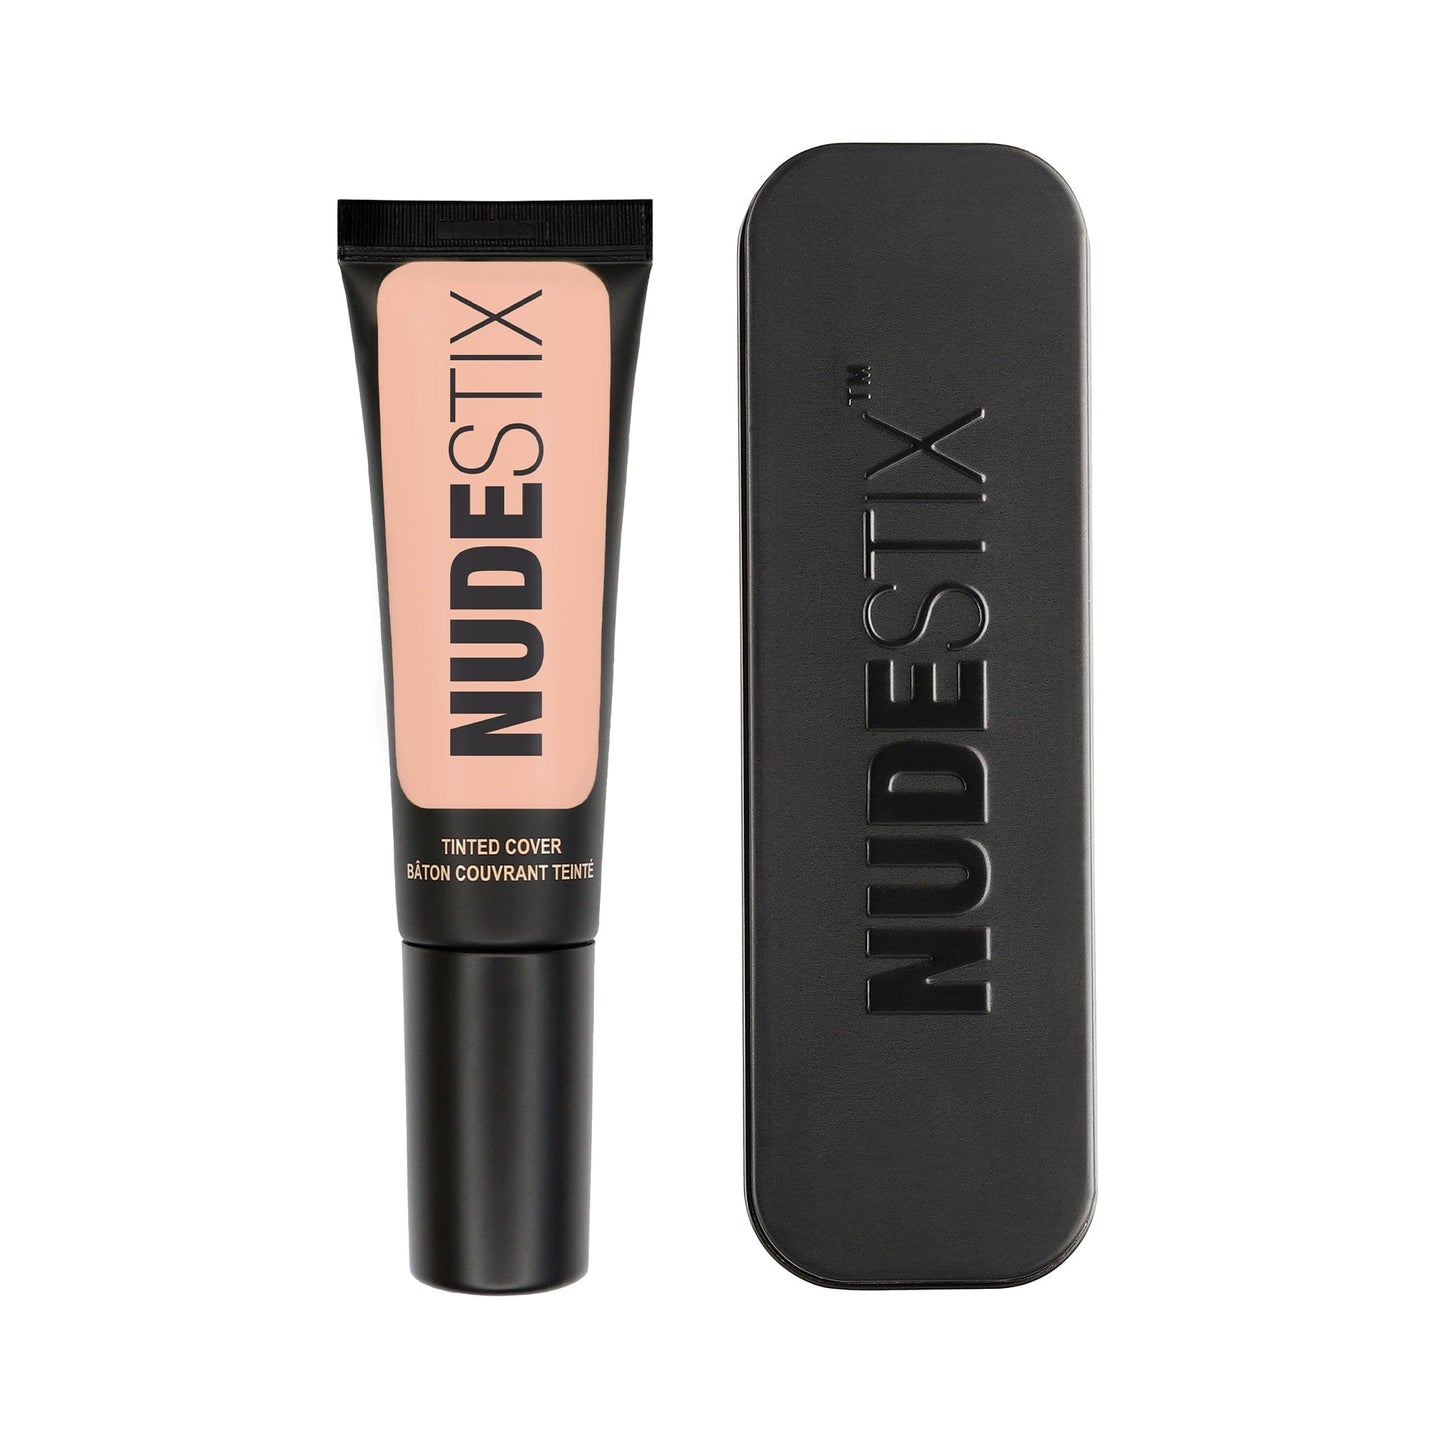 Tinted Cover Liquid Foundation in shade Nude 2 and Nudestix can